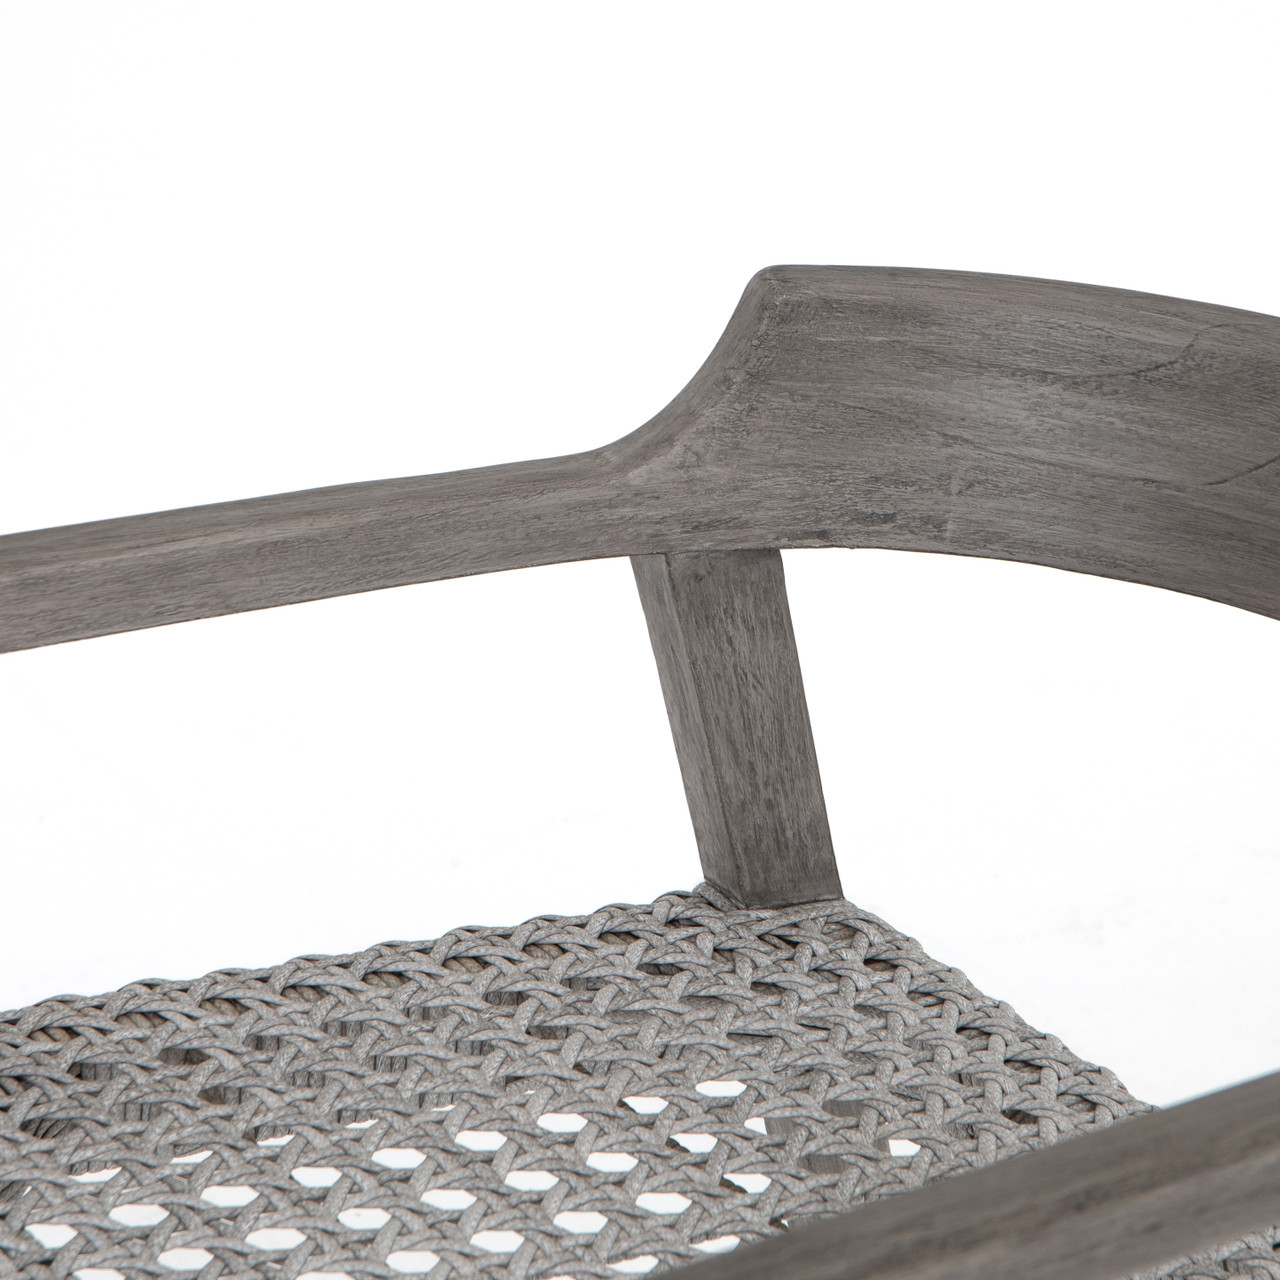 Enzo Outdoor Dining Chair